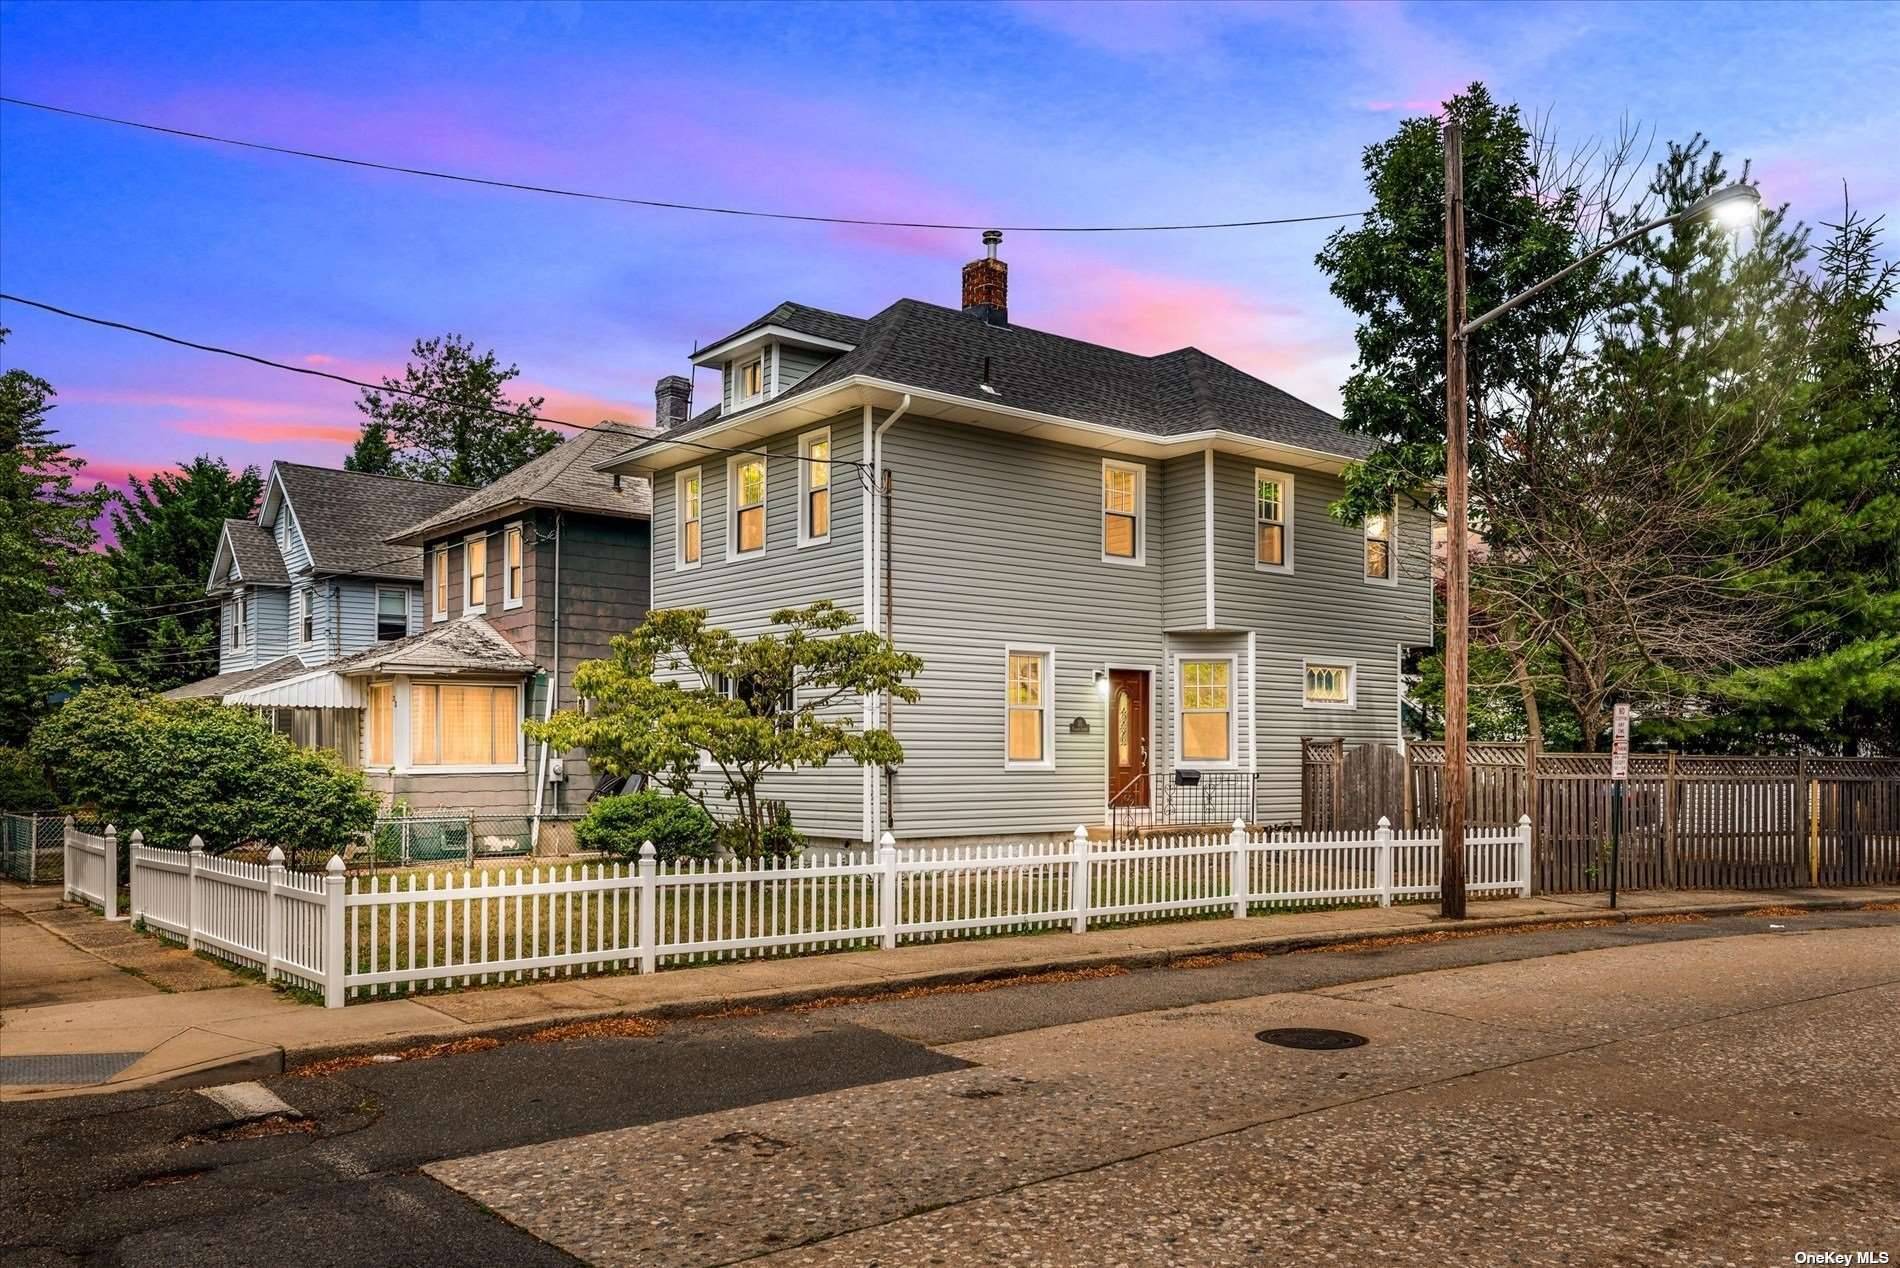 Meticulously renovated home in mint condition amp ; move in ready.